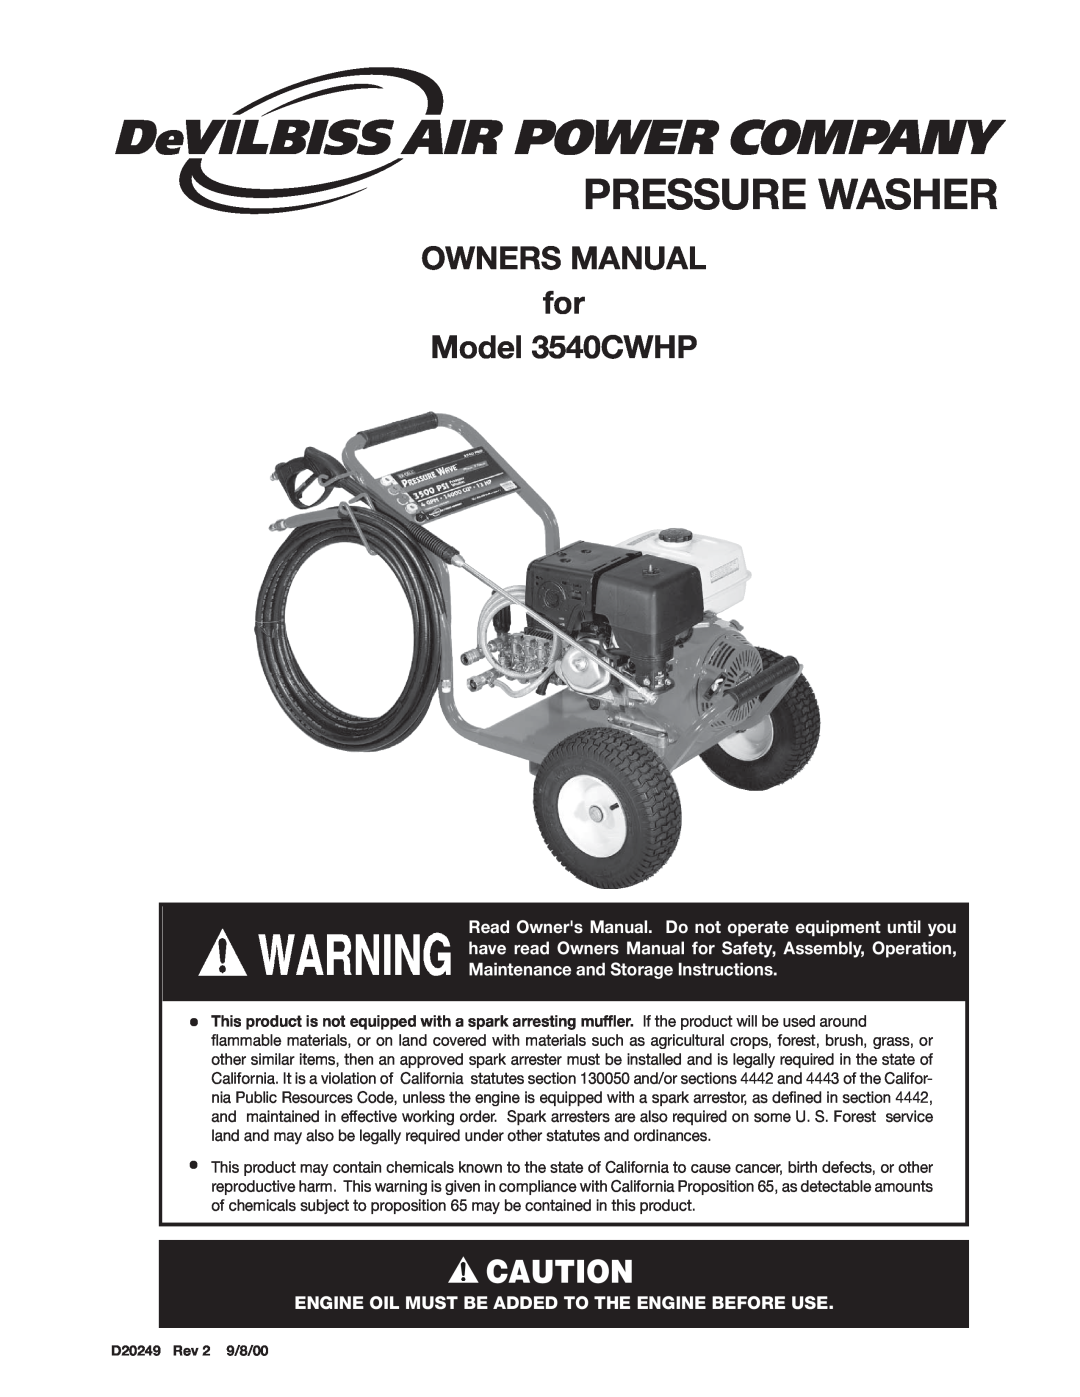 DeVillbiss Air Power Company 3540CWHP owner manual Pressure Washer, Engine Oil Must Be Added To The Engine Before Use 